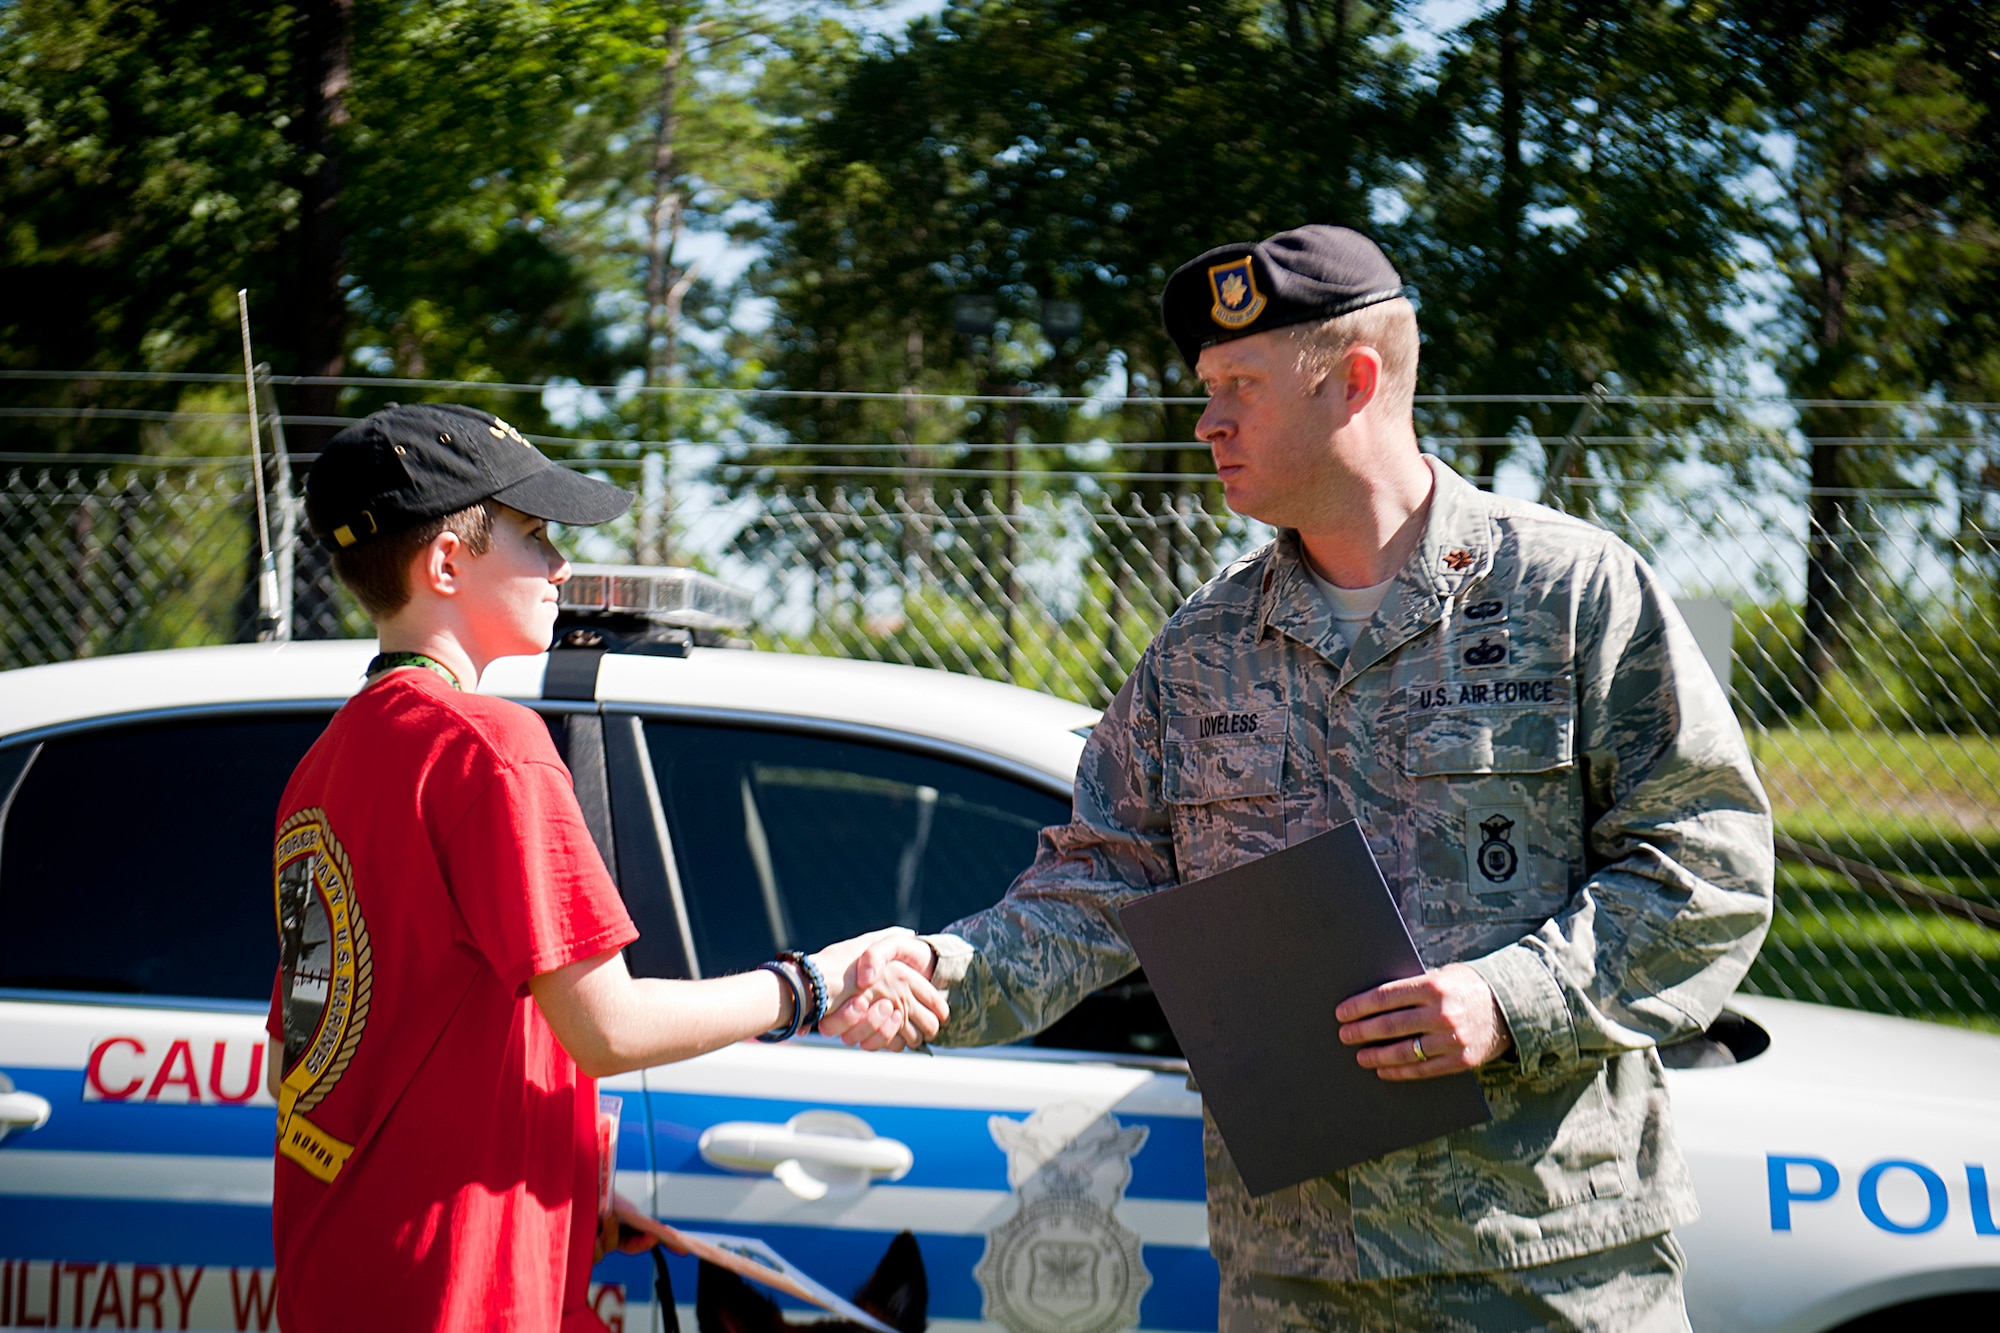 U.S. Air Force Maj. Brian Loveless, 23d Security Forces Squadron commander, shakes hands with Christopher Carswell after presenting him with a certificate of appreciation at Moody Air Force Base, Ga., July 10, 2012. Loveless thanked Christopher for his charity work with an organization that helps provide service dogs to people who face various day-to-day challenges due to conditions like blindness and cancer. (U.S. Air Force photo by Staff Sgt. Jamal D. Sutter/Released) 